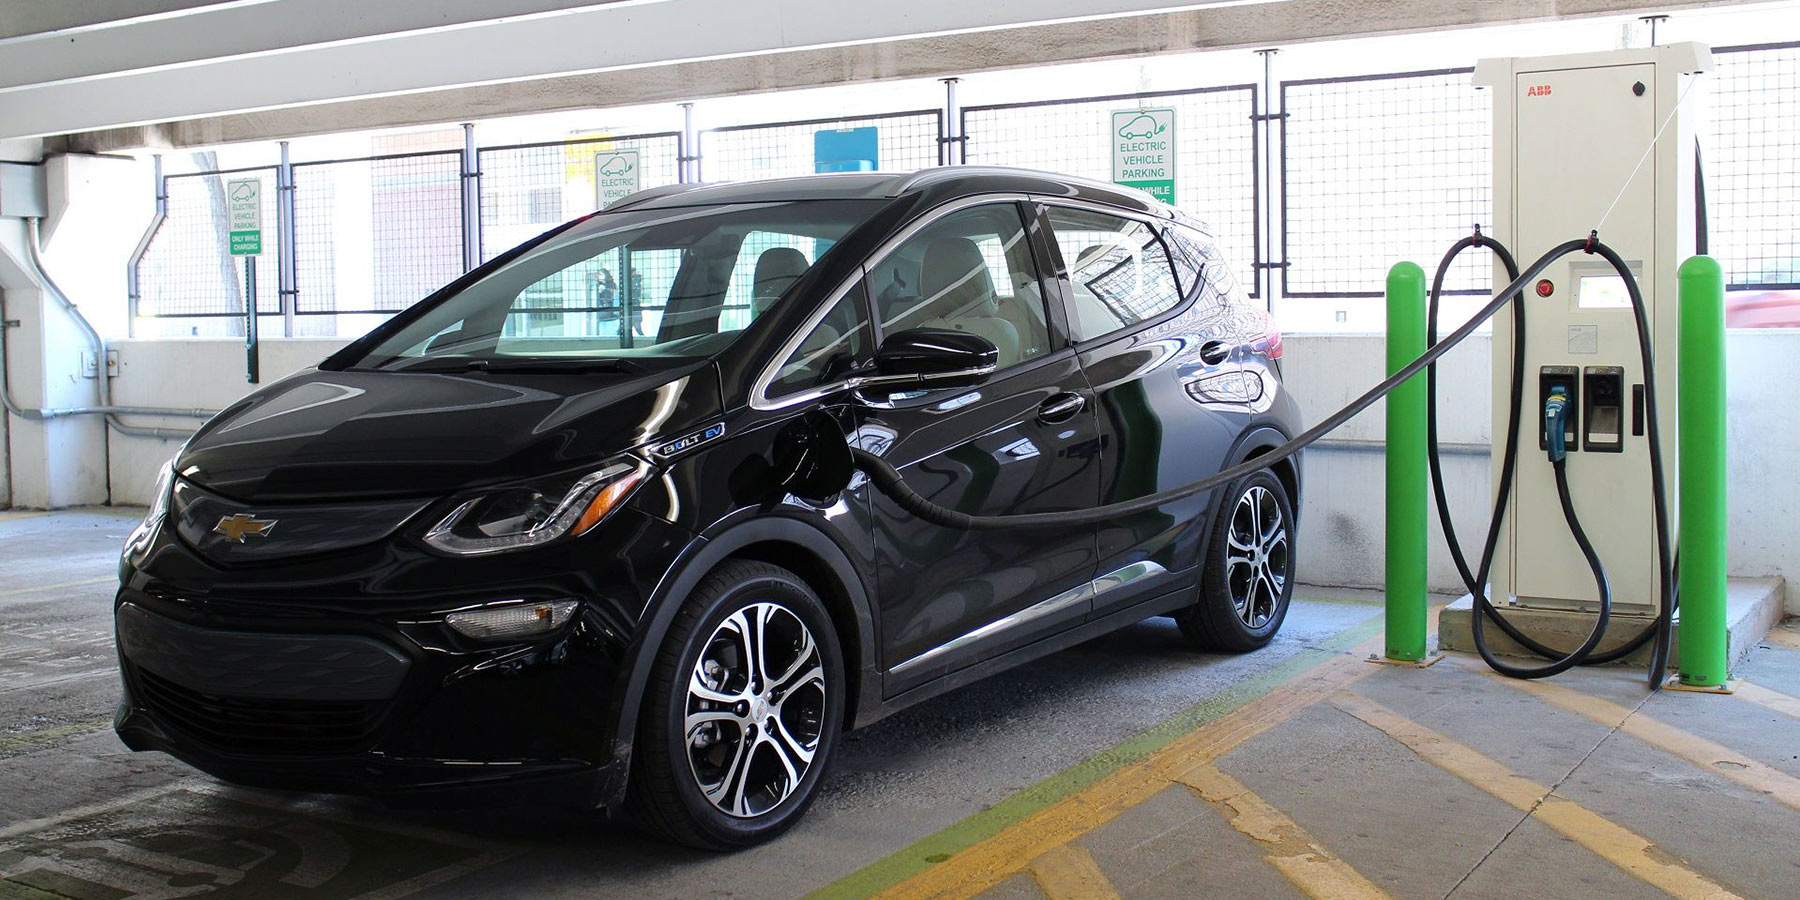 Chevy Bolt in parking structure